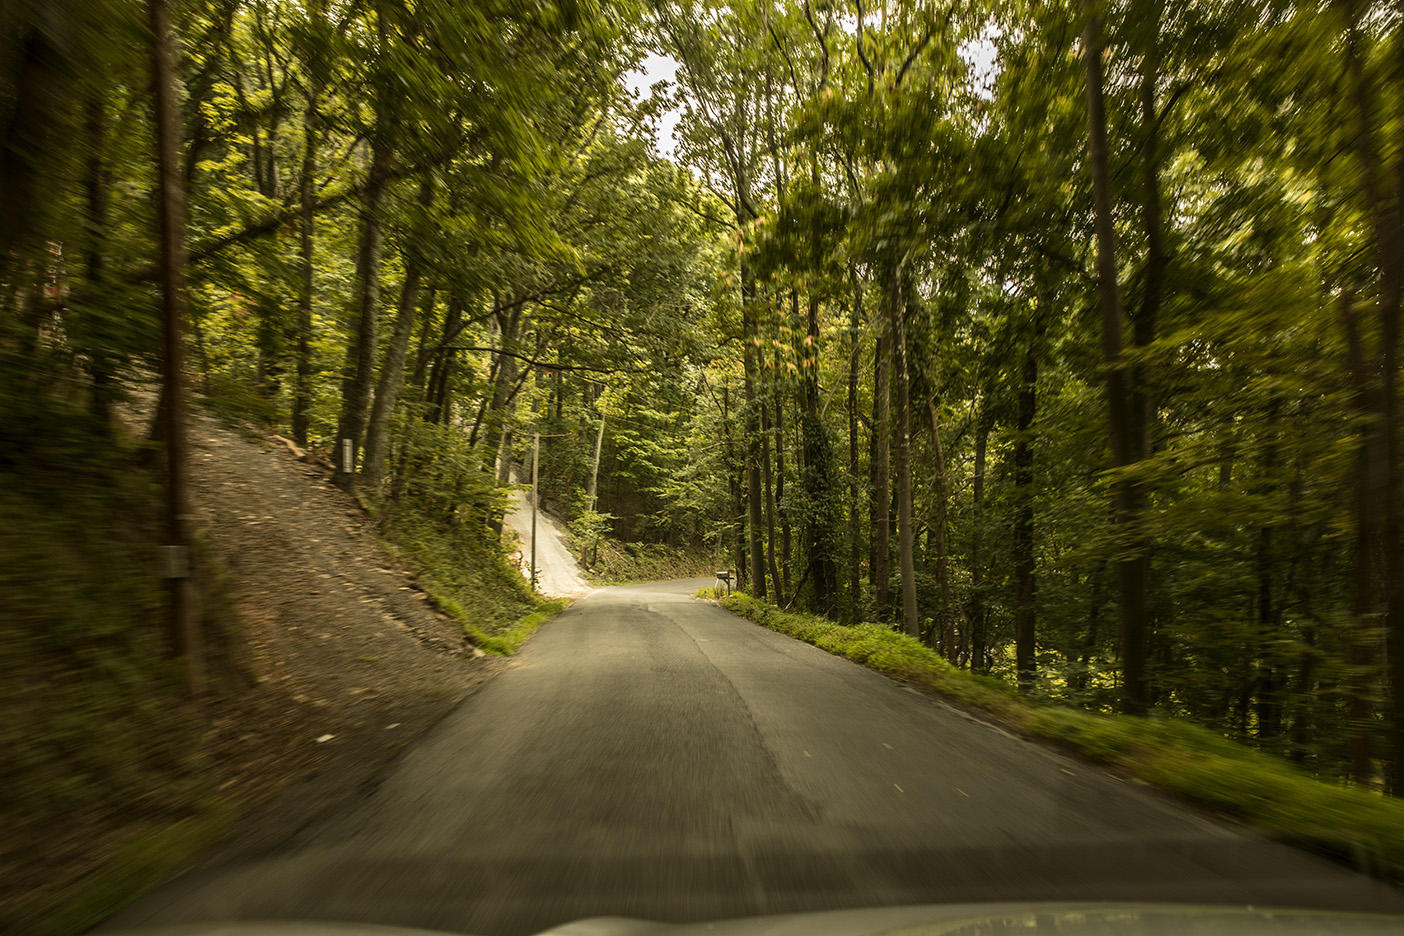 A wooded road in West Virginia.